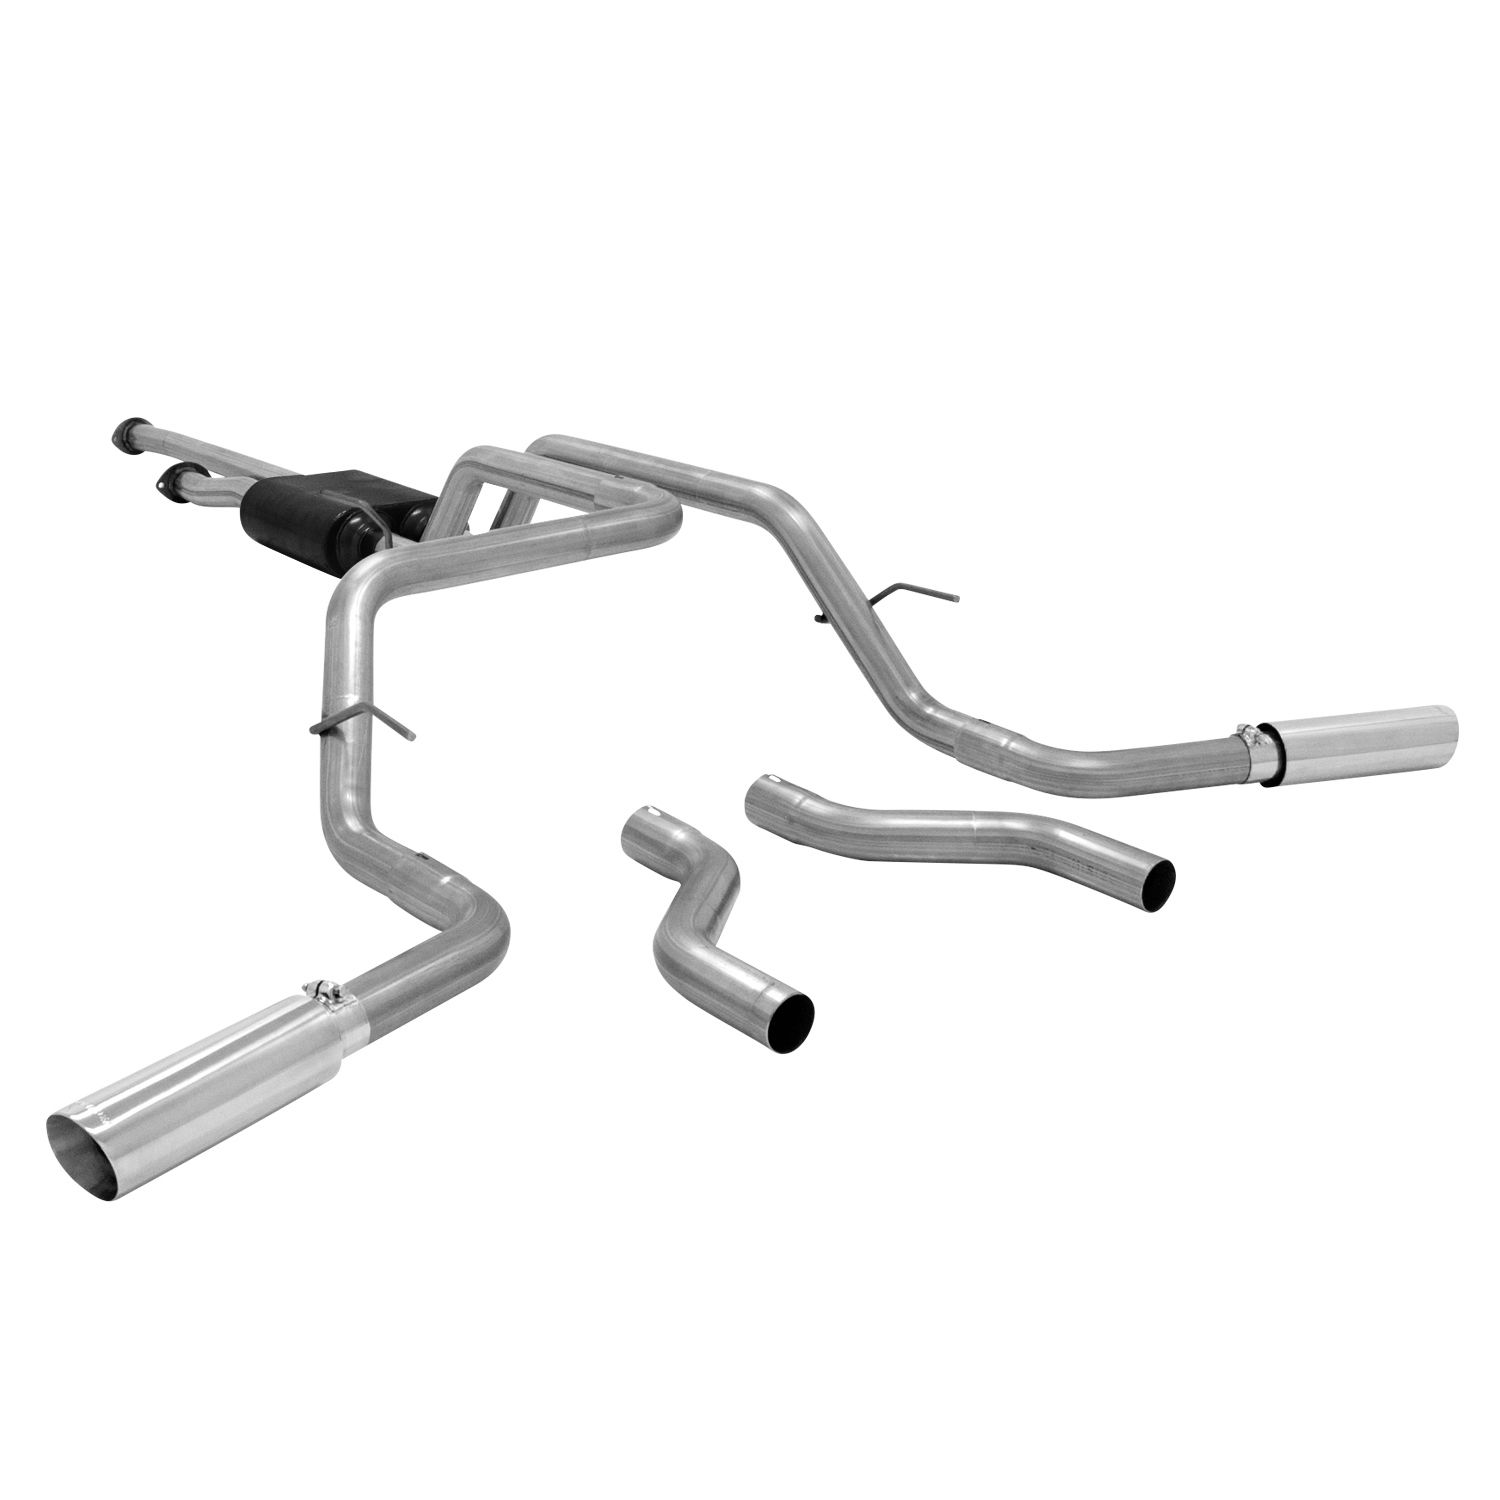 2015 Toyota Tundra TRD Pro 5.7L Flowmaster American Thunder Cat-Back Exhaust